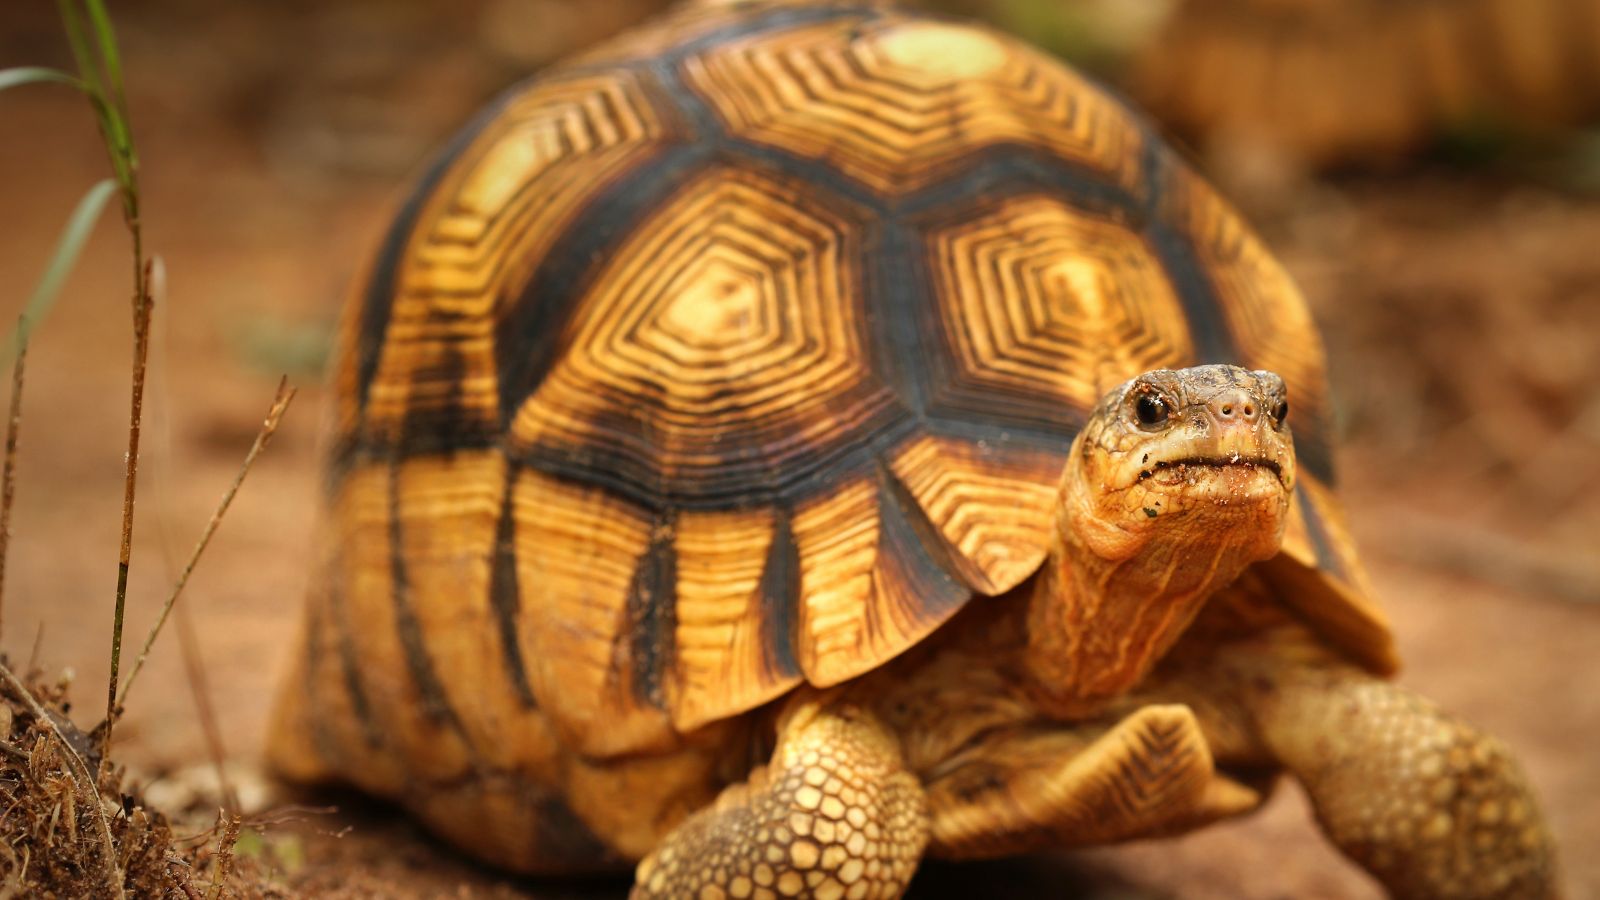 <p><span>Labeled as one of the most critically endangered tortoises globally, the ploughshare tortoise is threatened by habitat destruction and poaching practices. It is highly desired in the illegal pet trade because of its unique domed shell. Legal protections may be the only way to keep this species from extinction.</span></p>